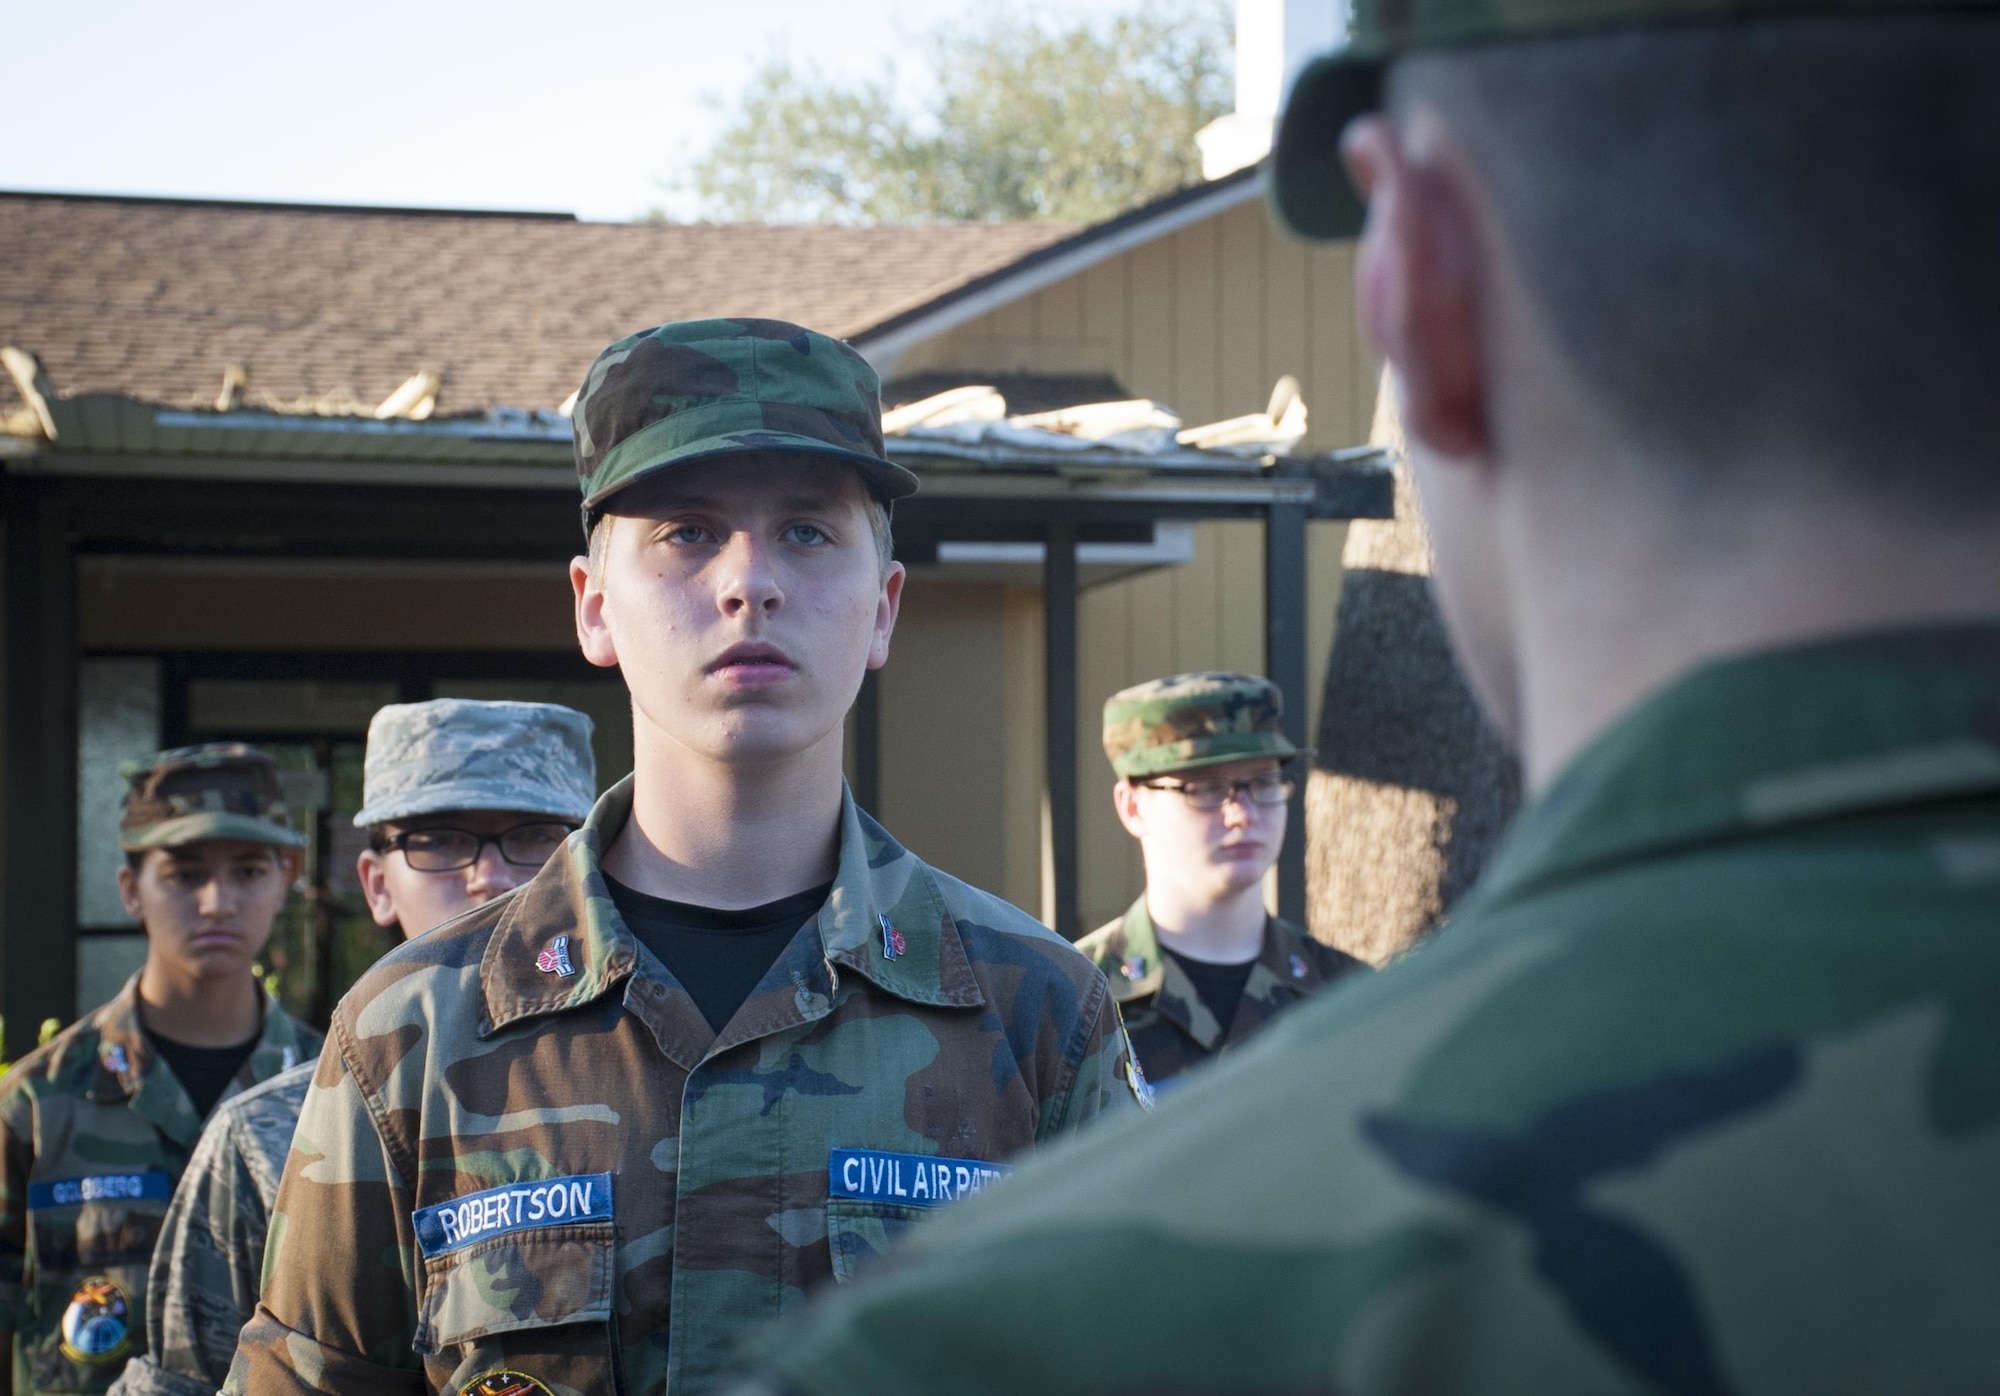 Civil Air Patrol (CAP) General Chuck Yeager Cadet Squadron cadets stand at attention in formation during a practice drill session in Brandon, Fla., May 8, 2017. The squadron received both the Florida CAP Wing 2017 Squadron of Merit award and the 2017 CAP Squadron of Distinction award for the southeast region. (U.S. Air Force by Airman 1st Class Mariette Adams)